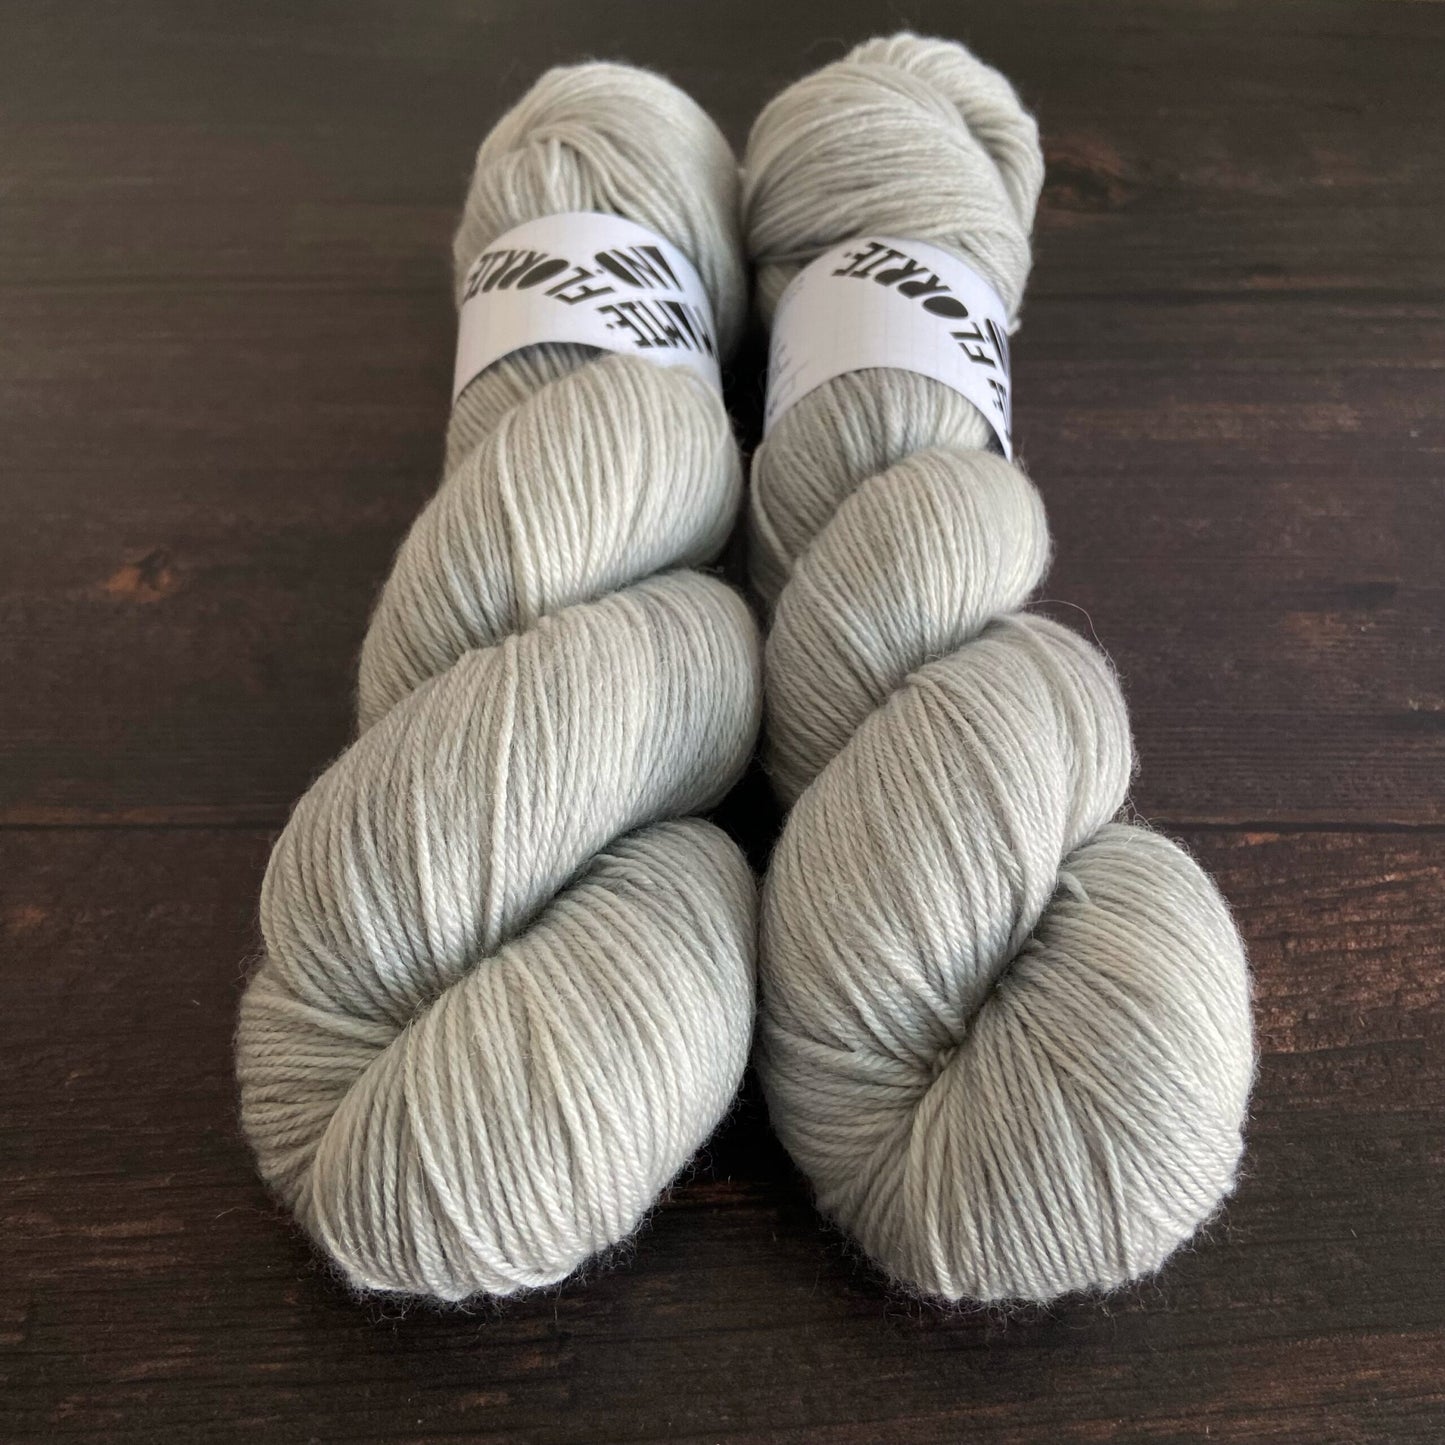 Morning Mist over Combs - Bamboo and Merino 4ply